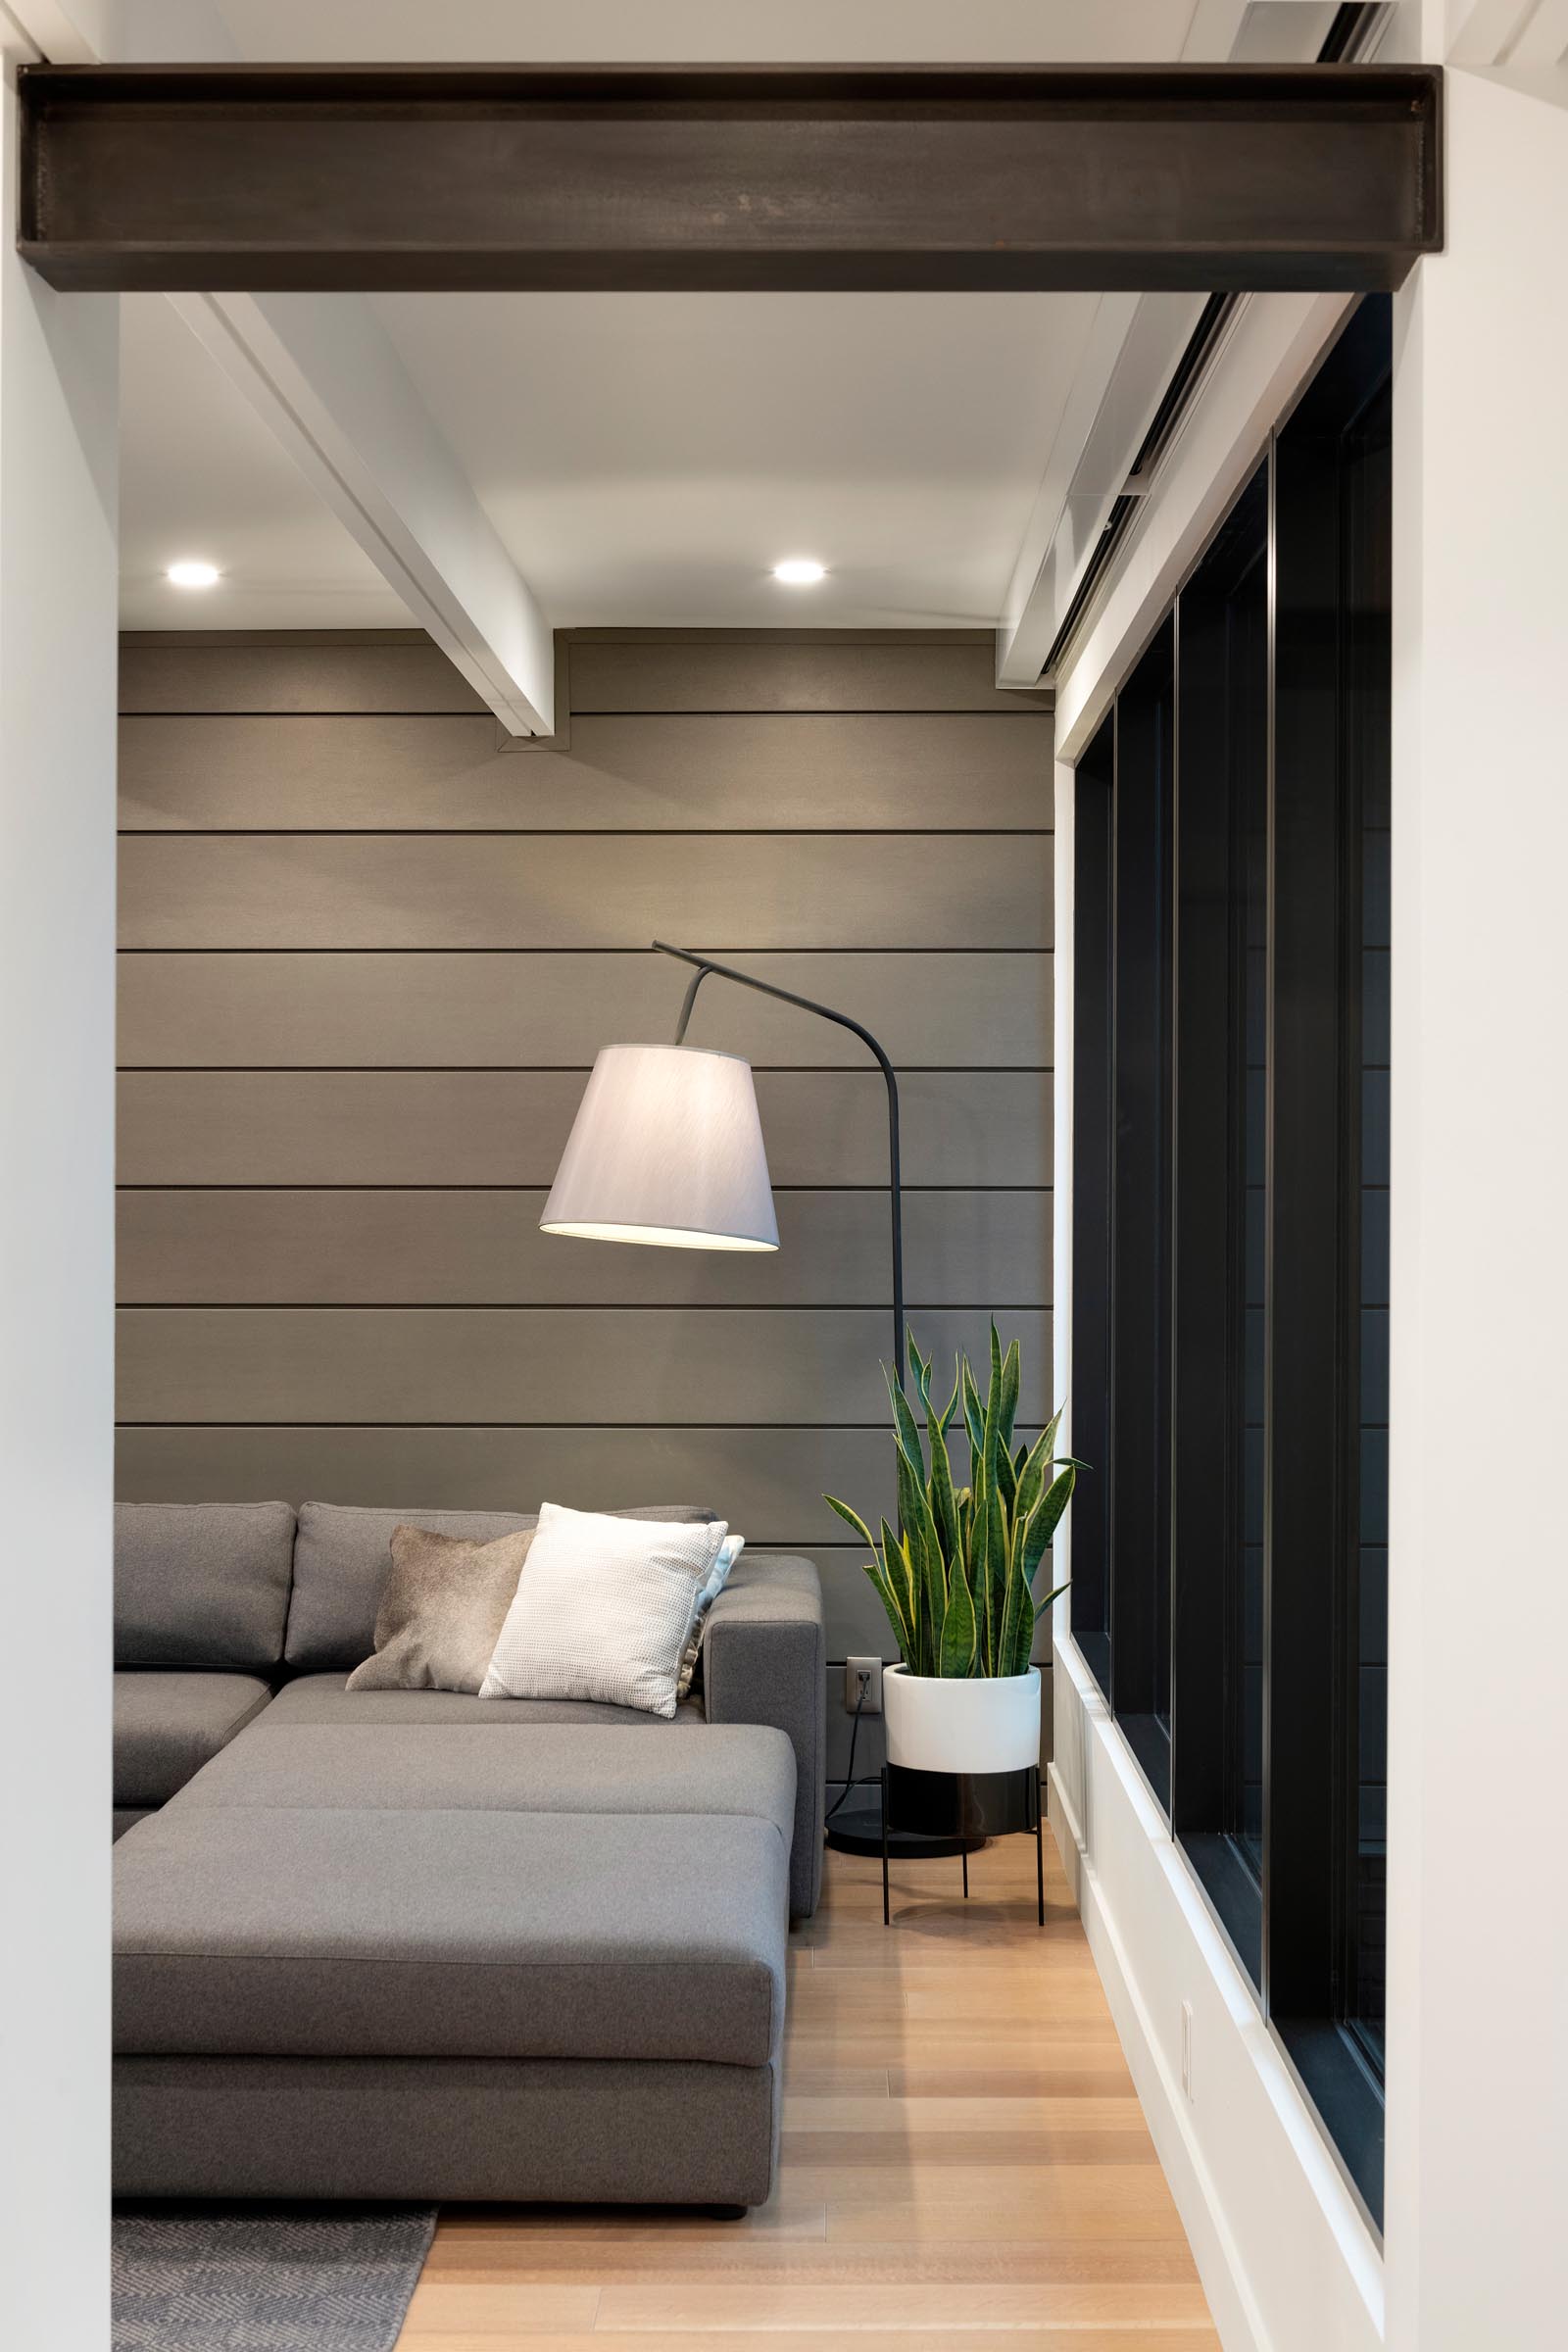 A modern living room with a gray paneled wall and matching sofa.